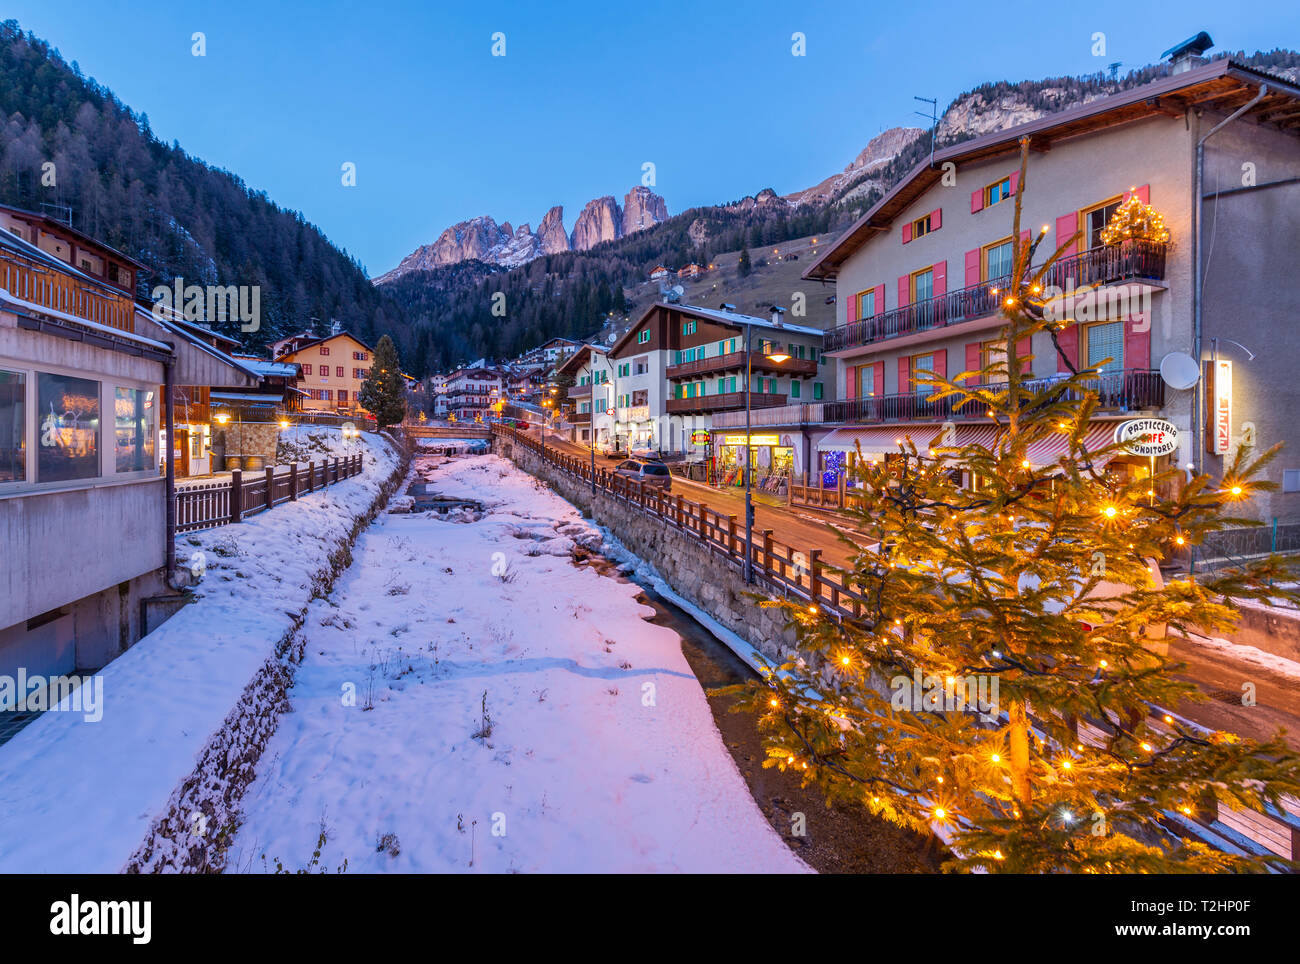 View of Campitello di Fassa at Christmas and Grohmannspitze, Punta Grohmann visible, Val di Fassa, Trentino, Italy, Europe Stock Photo